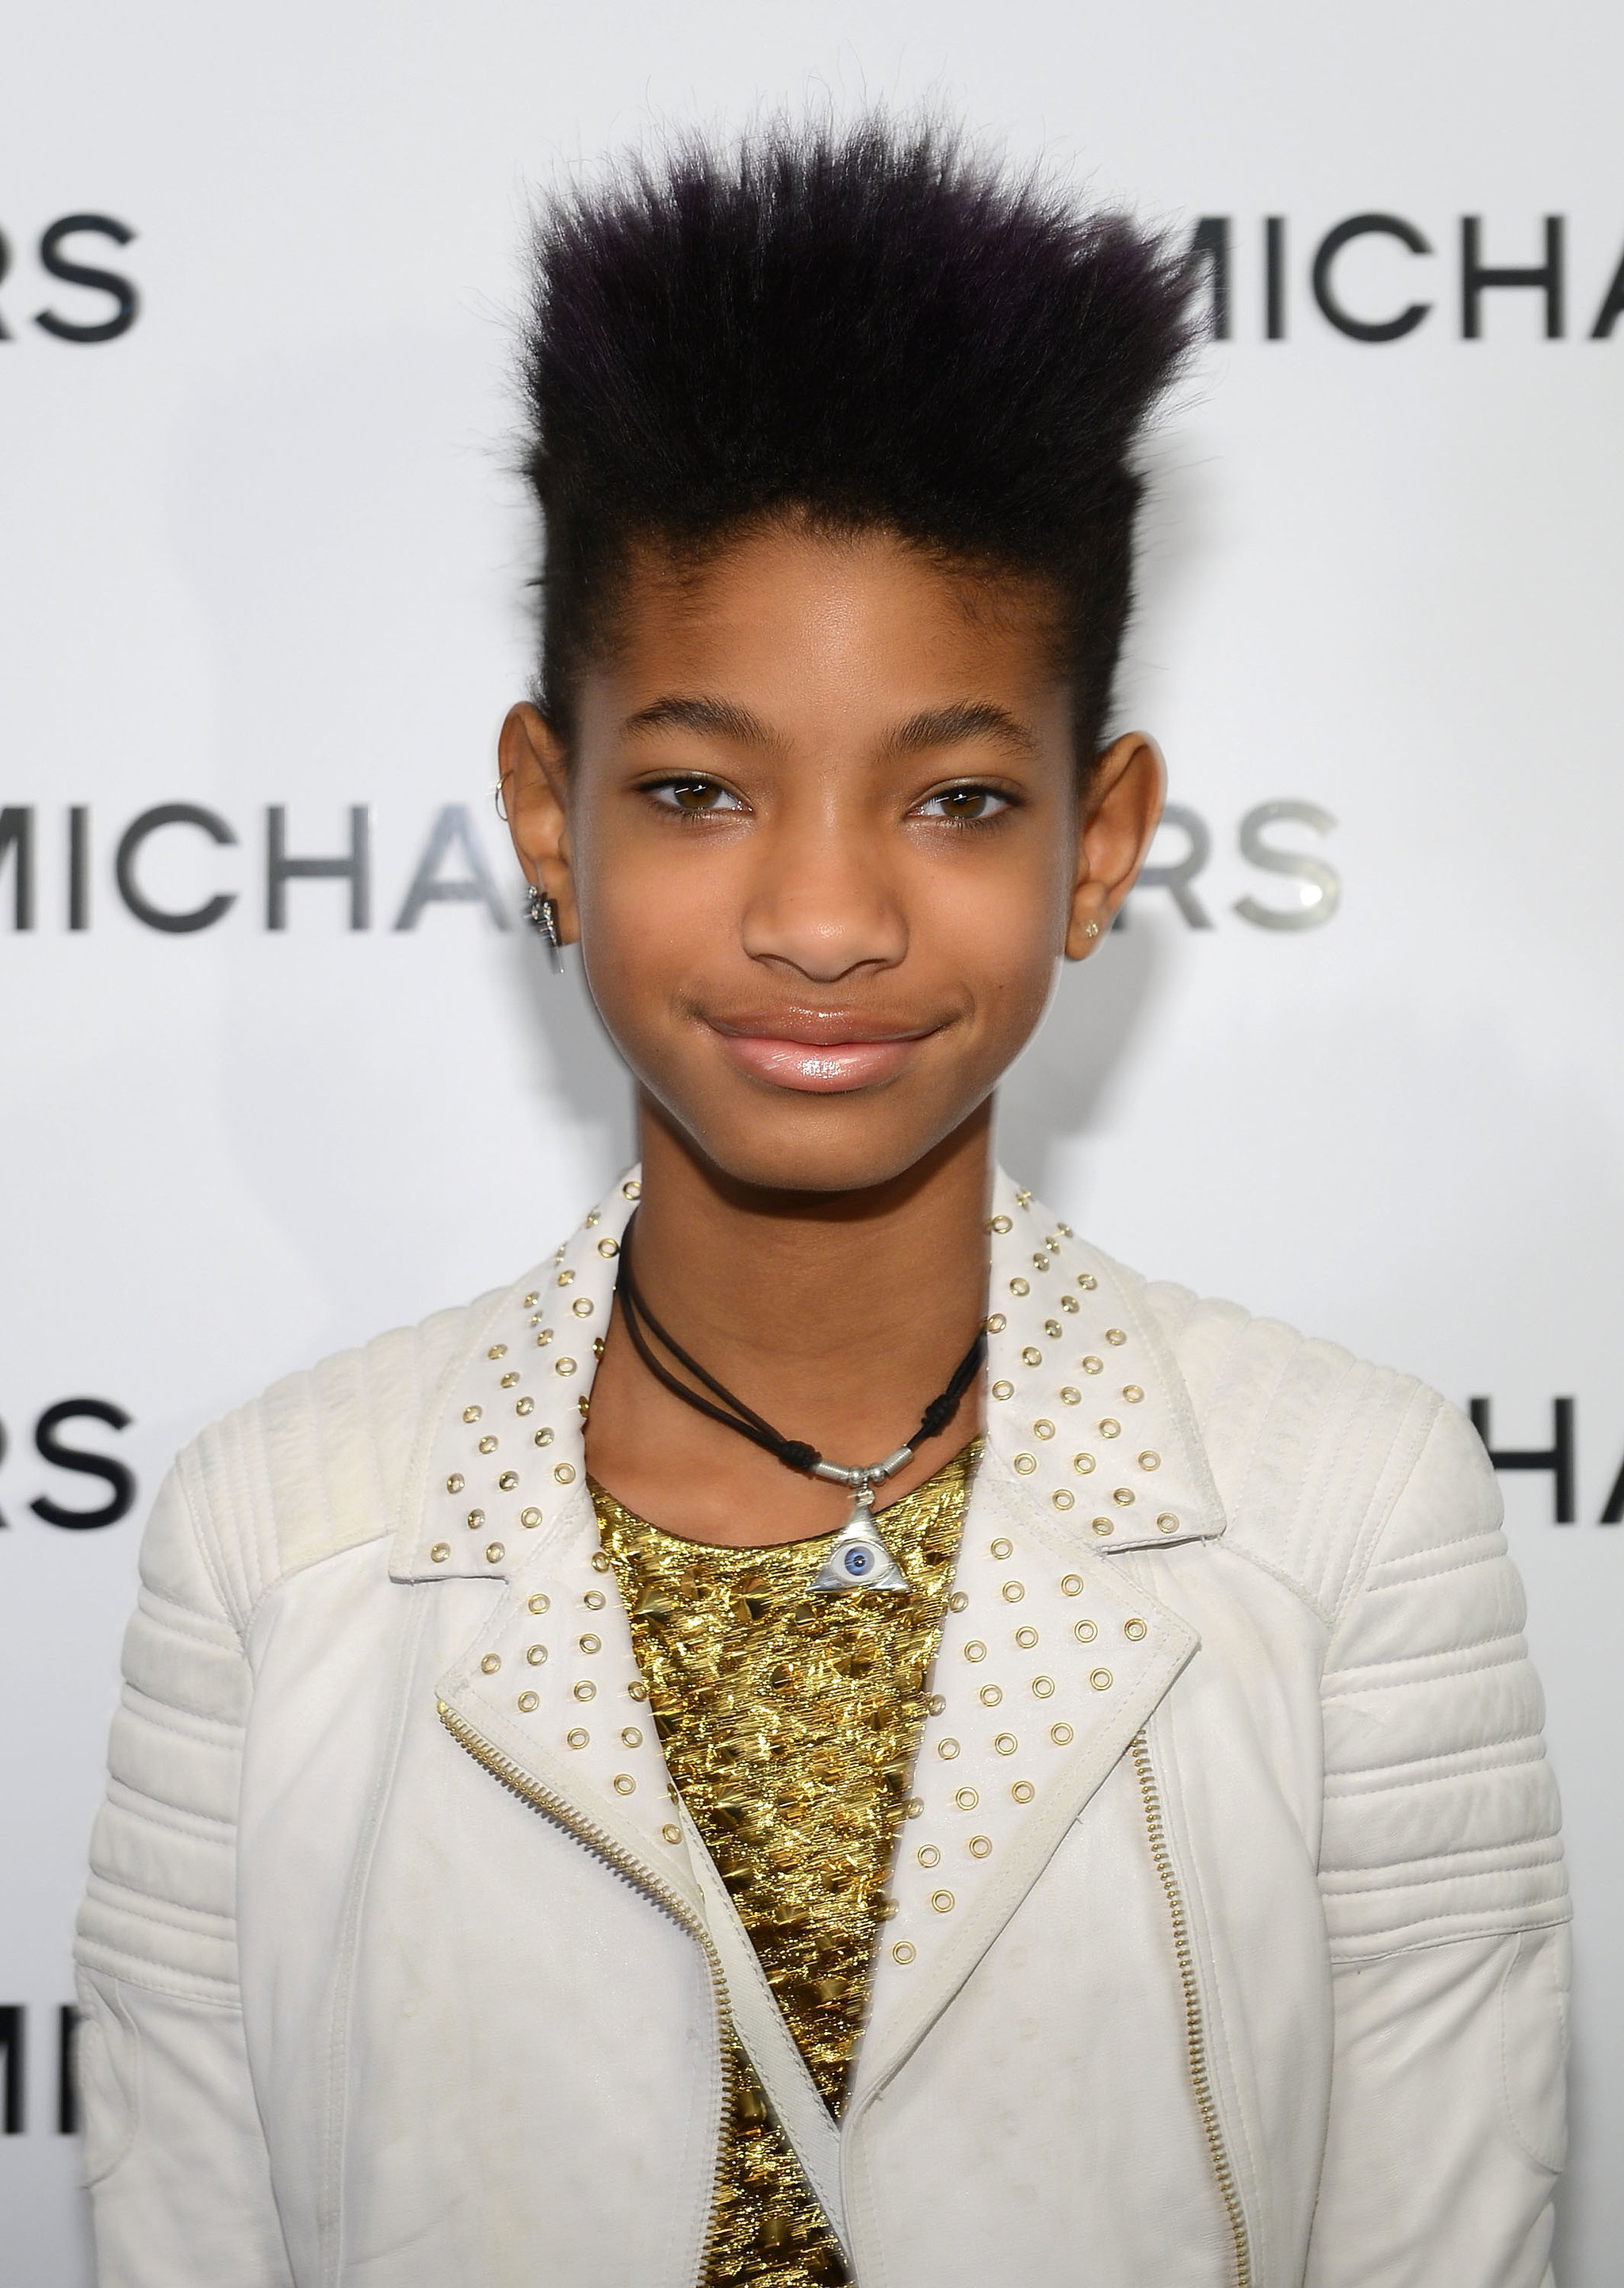 Another Stand Up Hair Look Had To Times Willow Smith Was A Beauty Badass And You Wanted